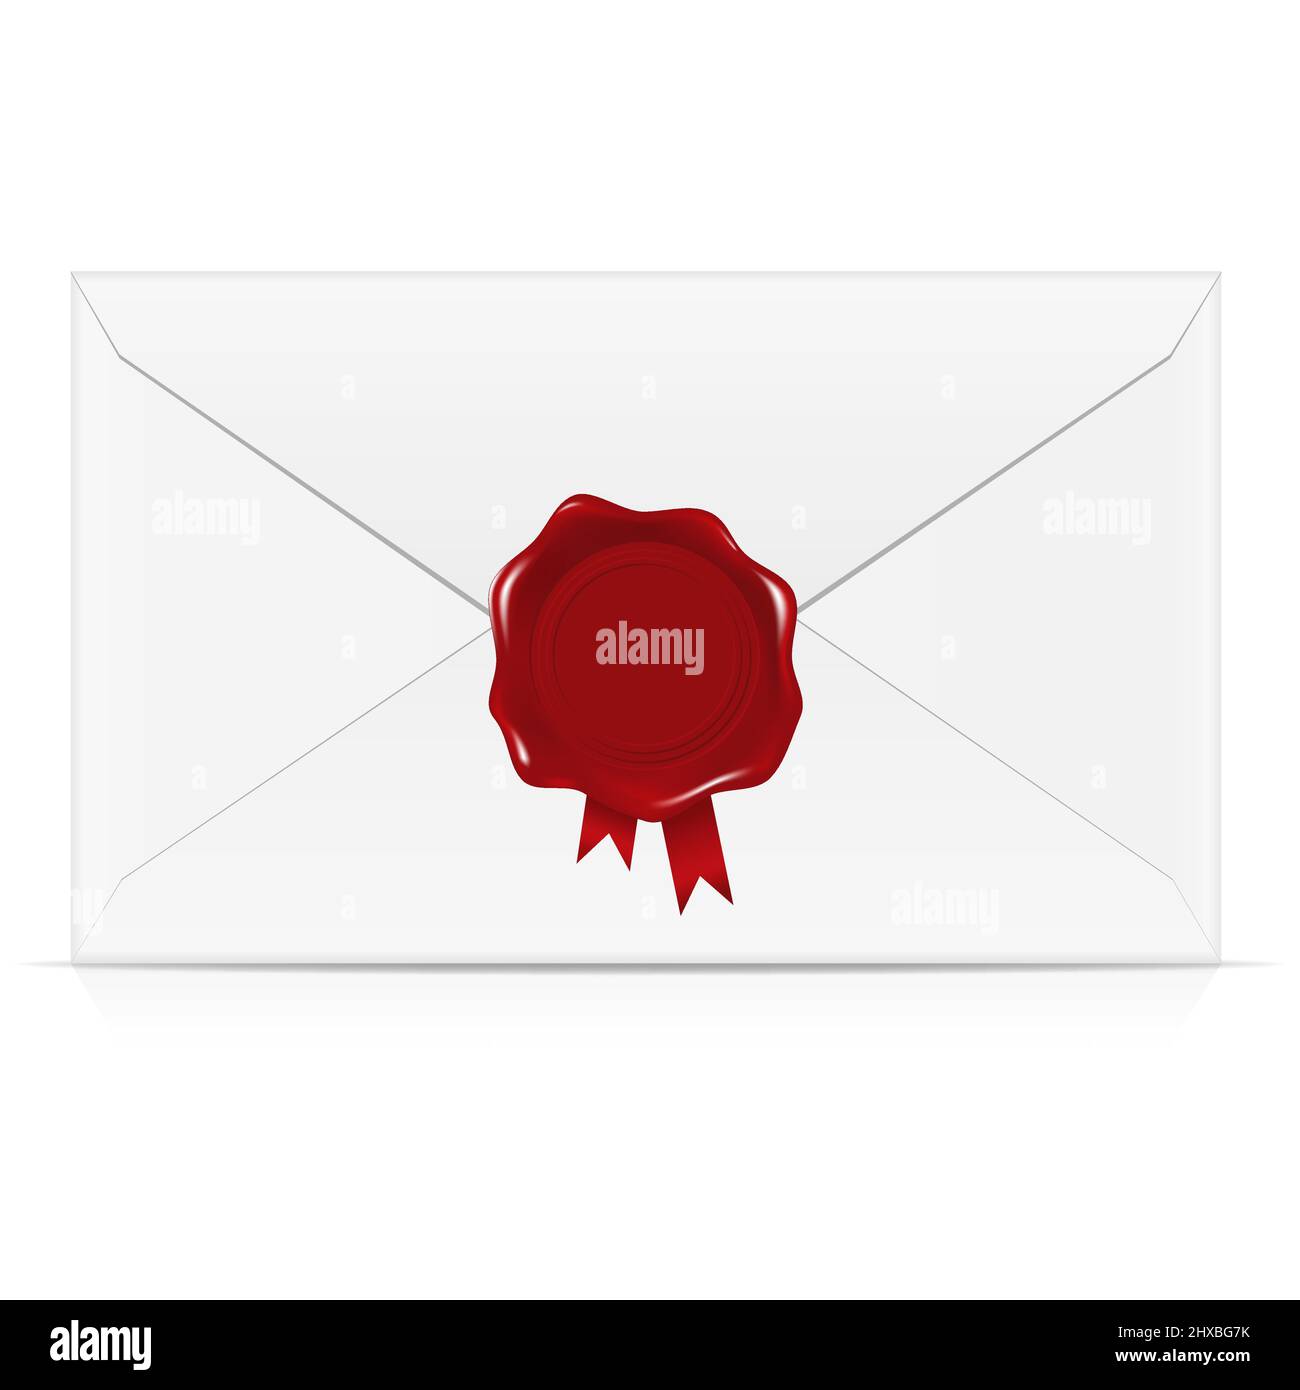 Stack of vintage envelopes with red sealant Stock Photo by Shaiith